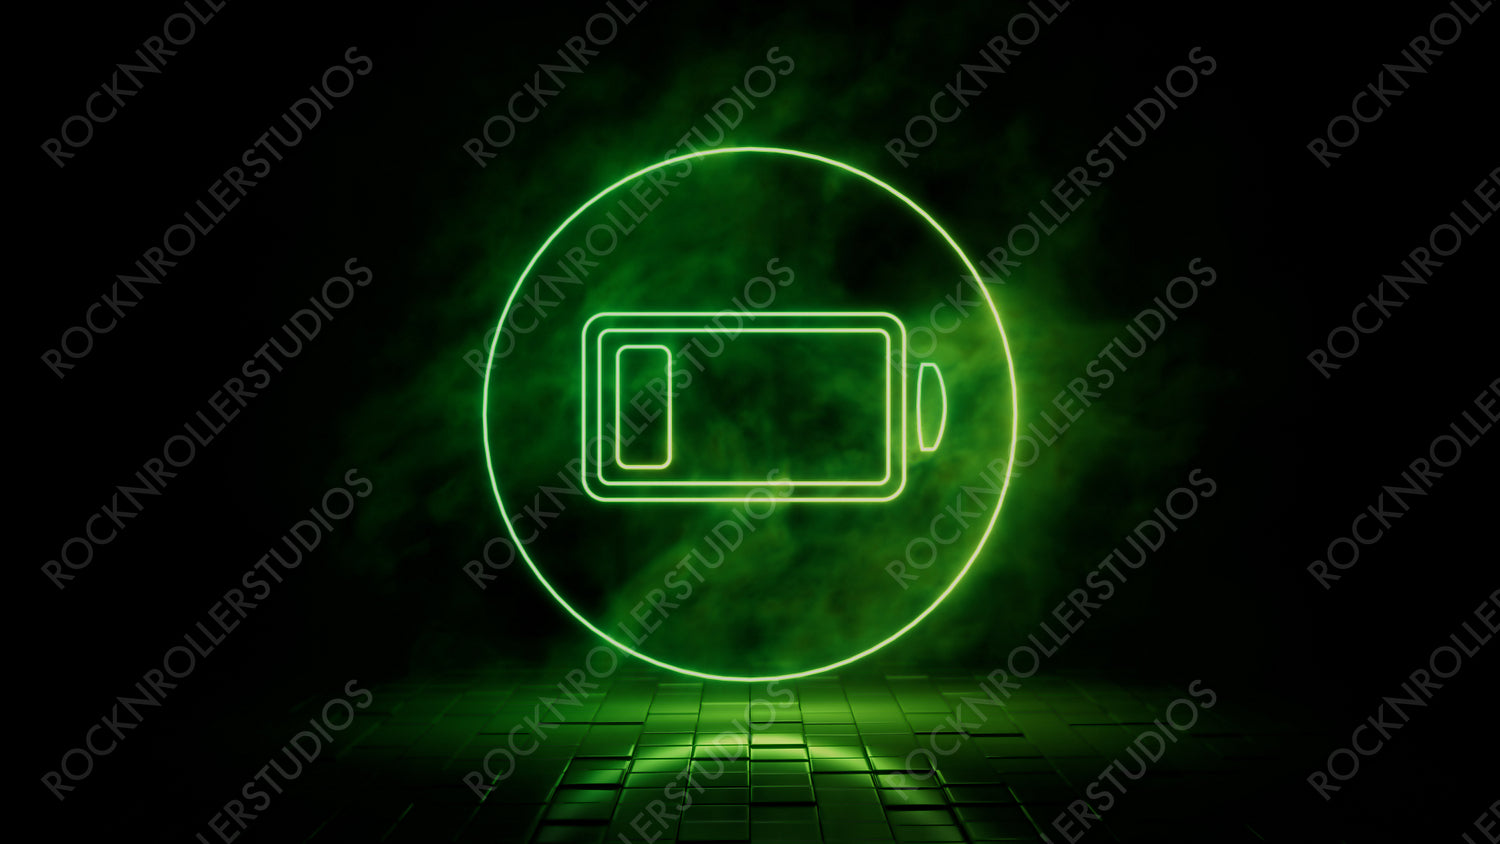 Green neon light low battery icon. Vibrant colored technology symbol, isolated on a black background. 3D Render